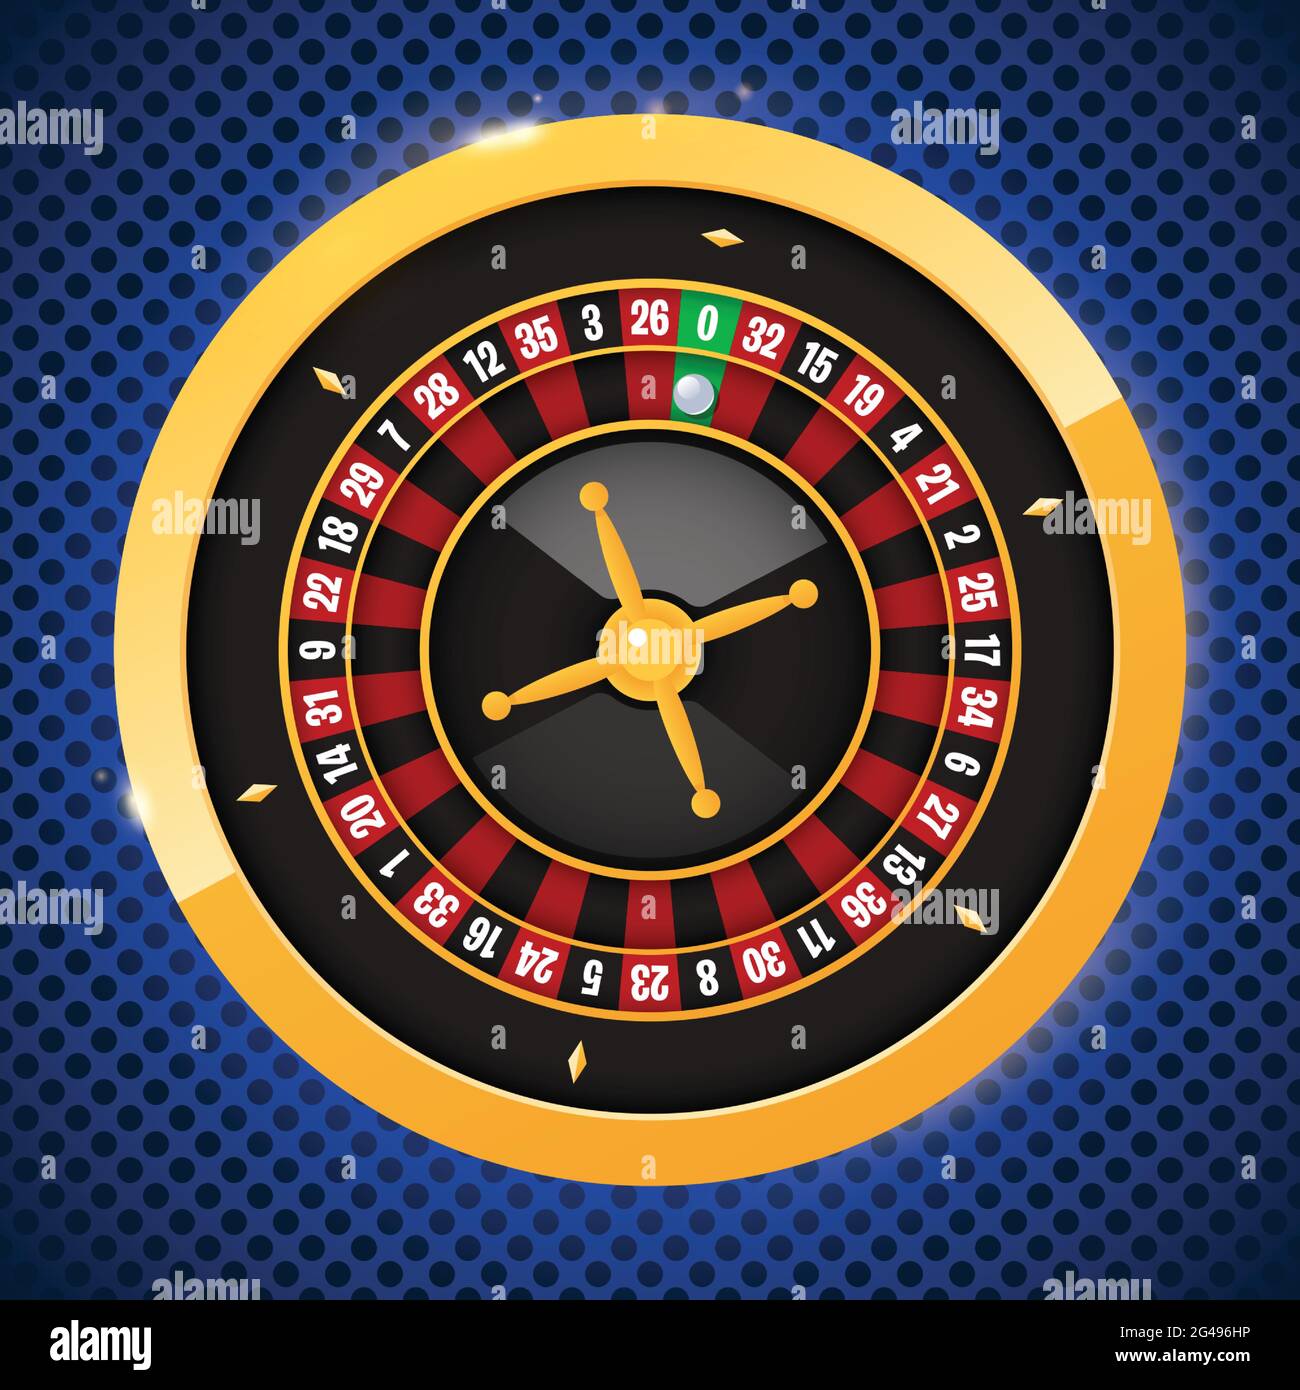 Realistic casino gambling roulette wheel on blue background. Vector play chance luck roulette wheel illustration Stock Vector